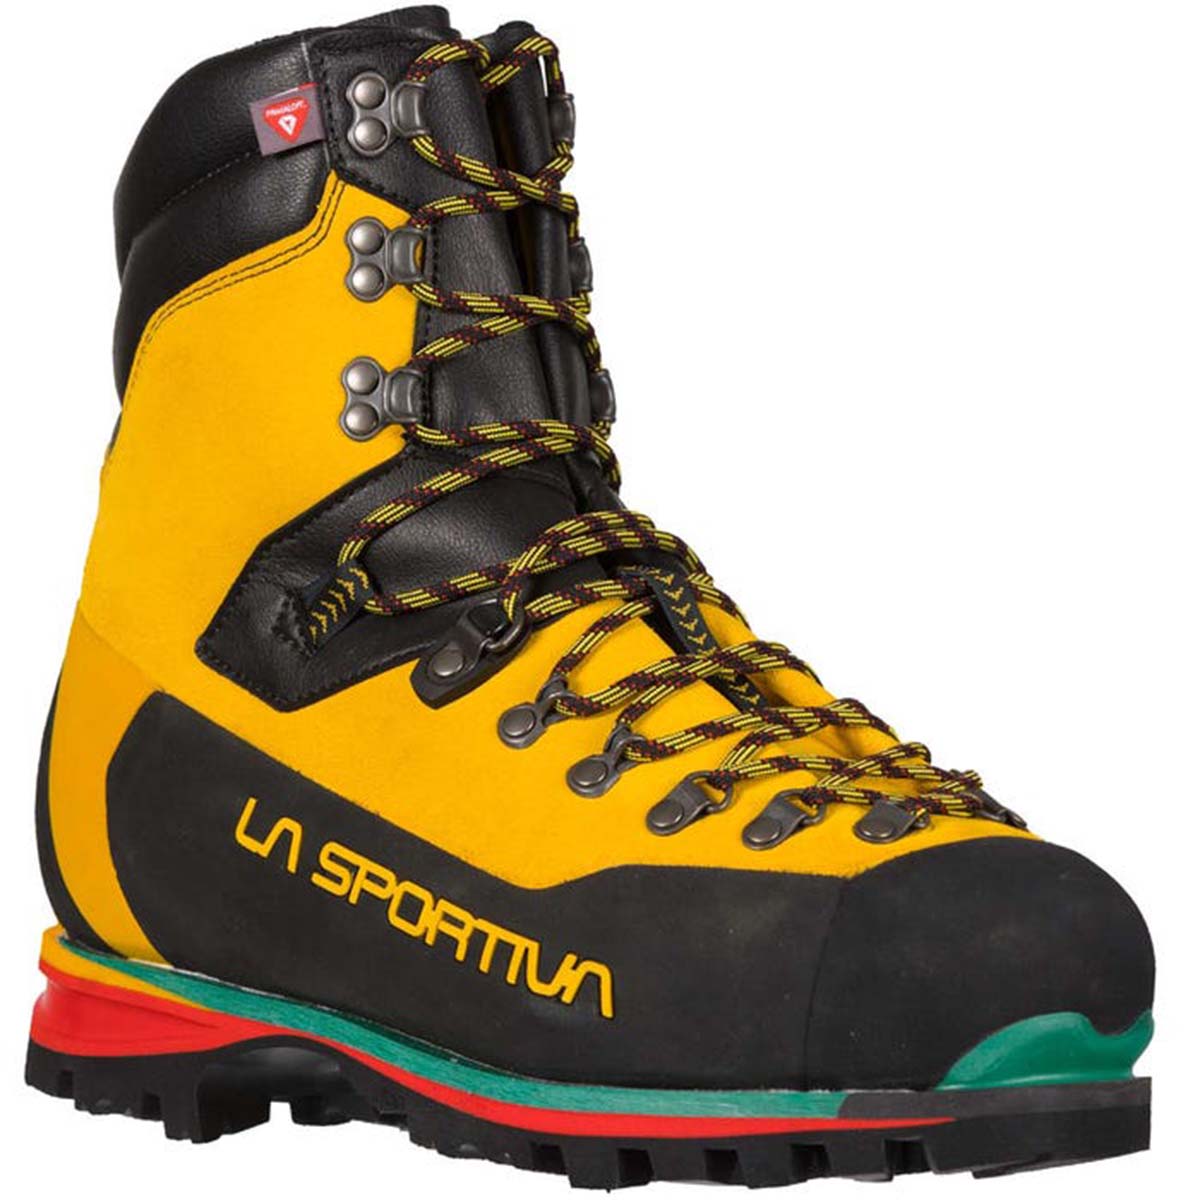 La Sportiva Nepal Extreme Mens Mountaineering Shoes Yellow